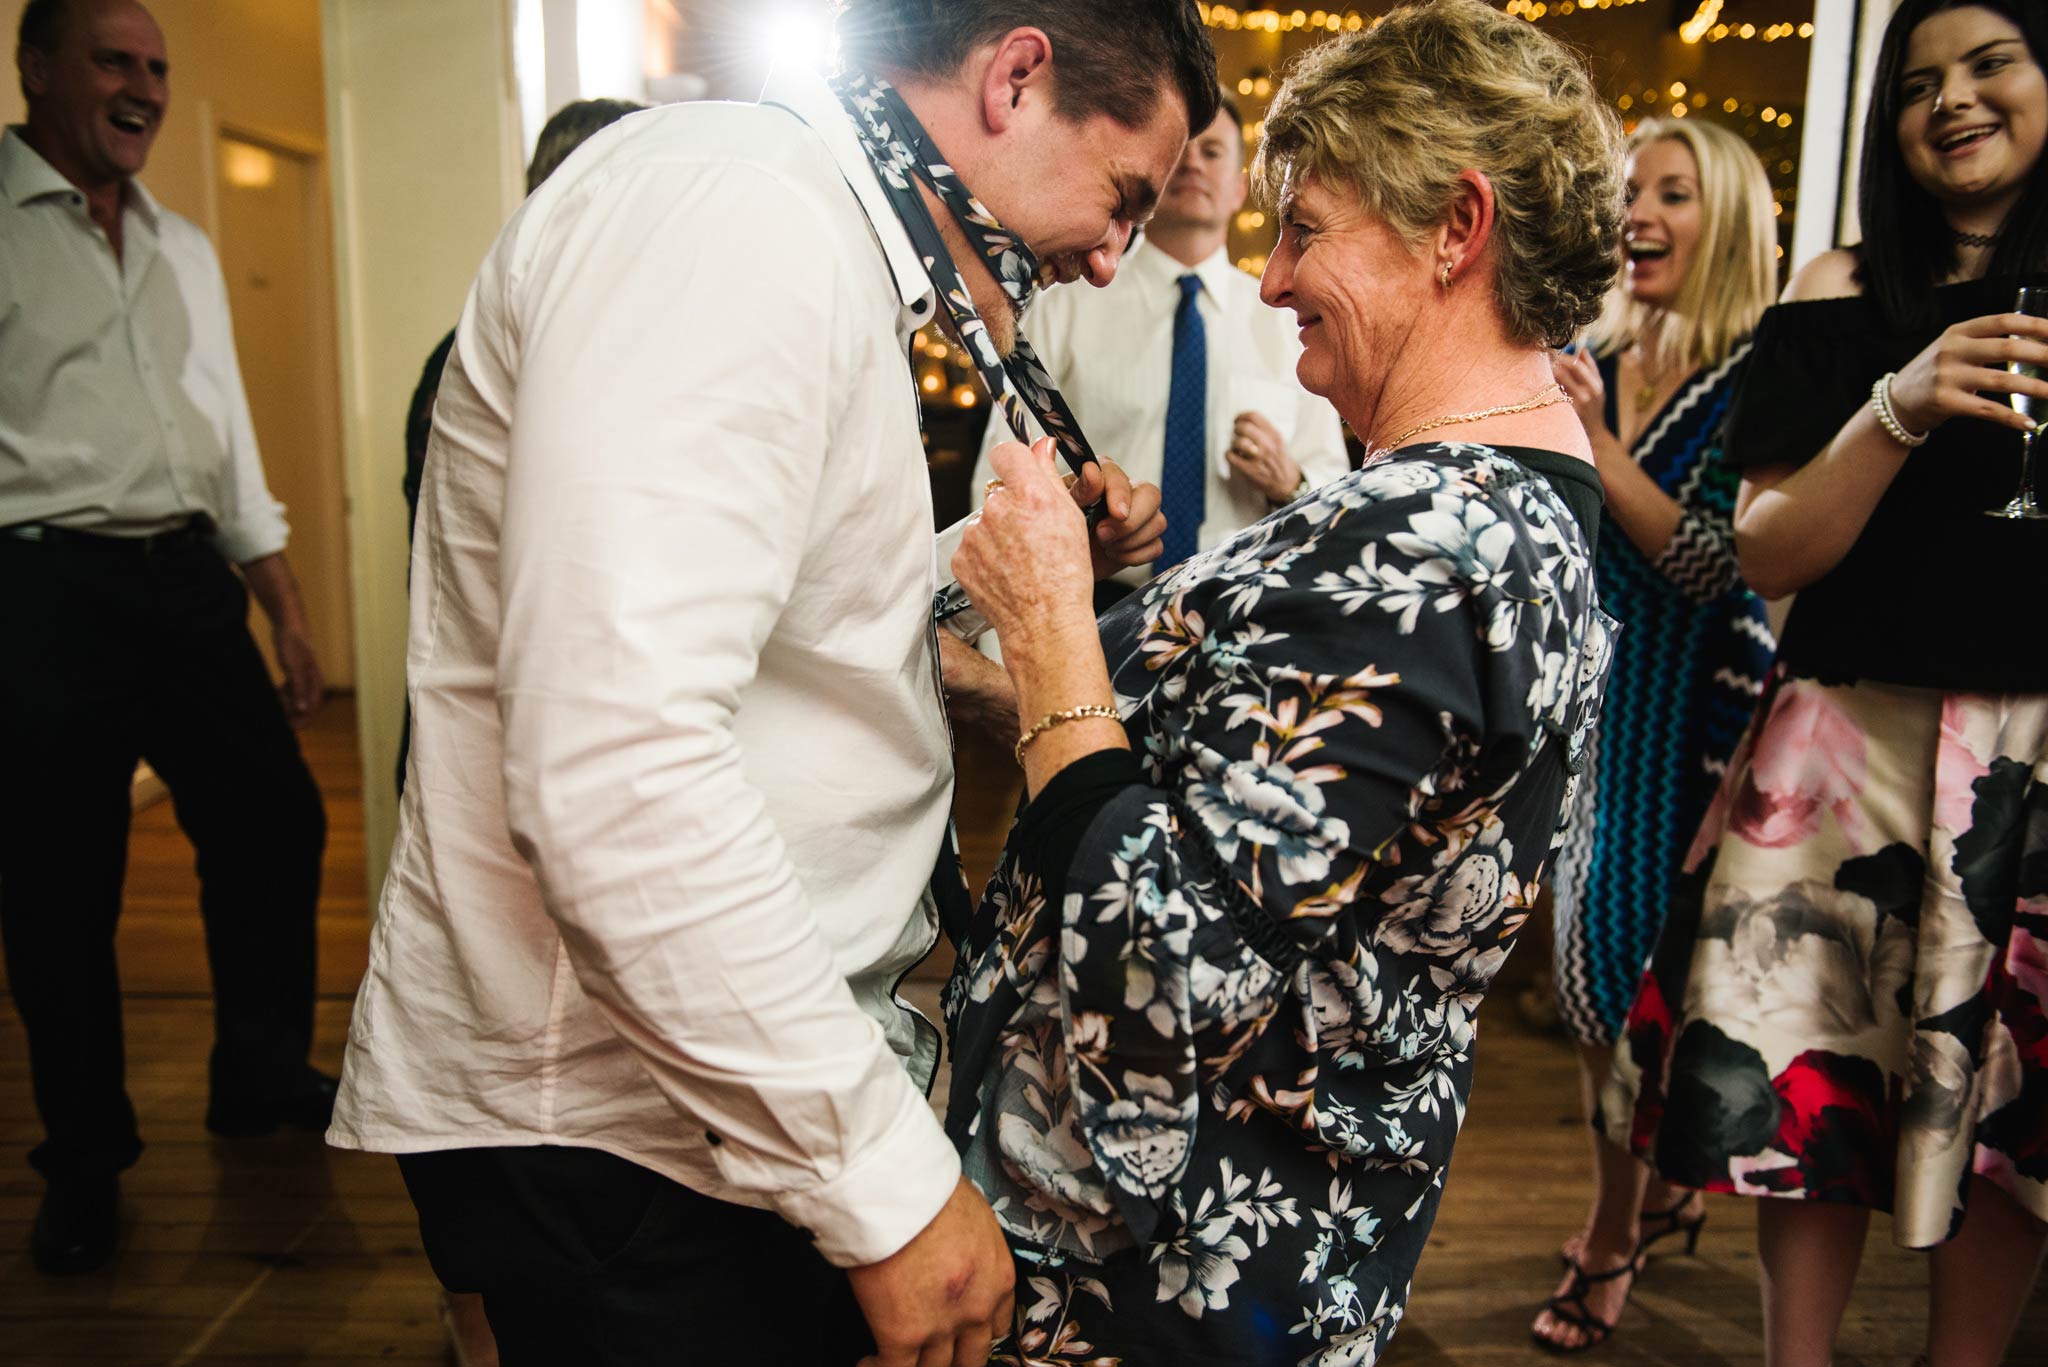 Aunt dirty dancing with guest at wedding